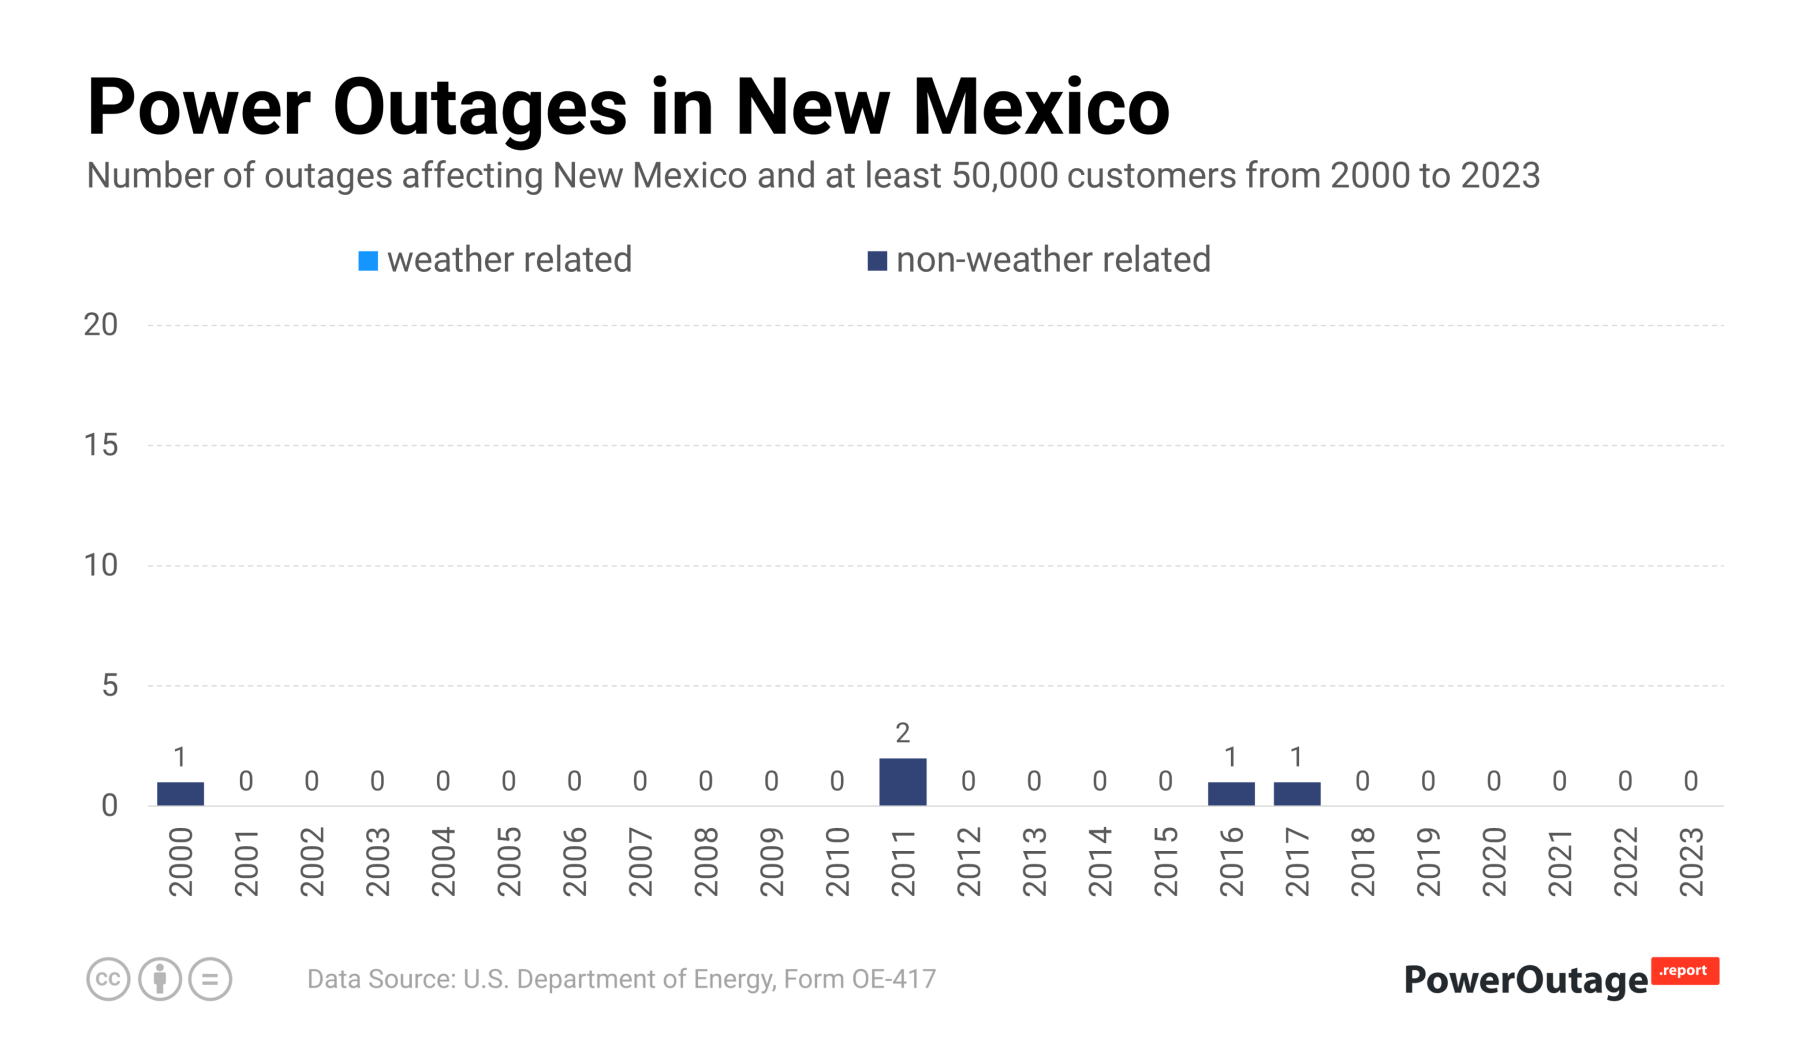 New Mexico Power Outage Statistics (2000 - 2021)